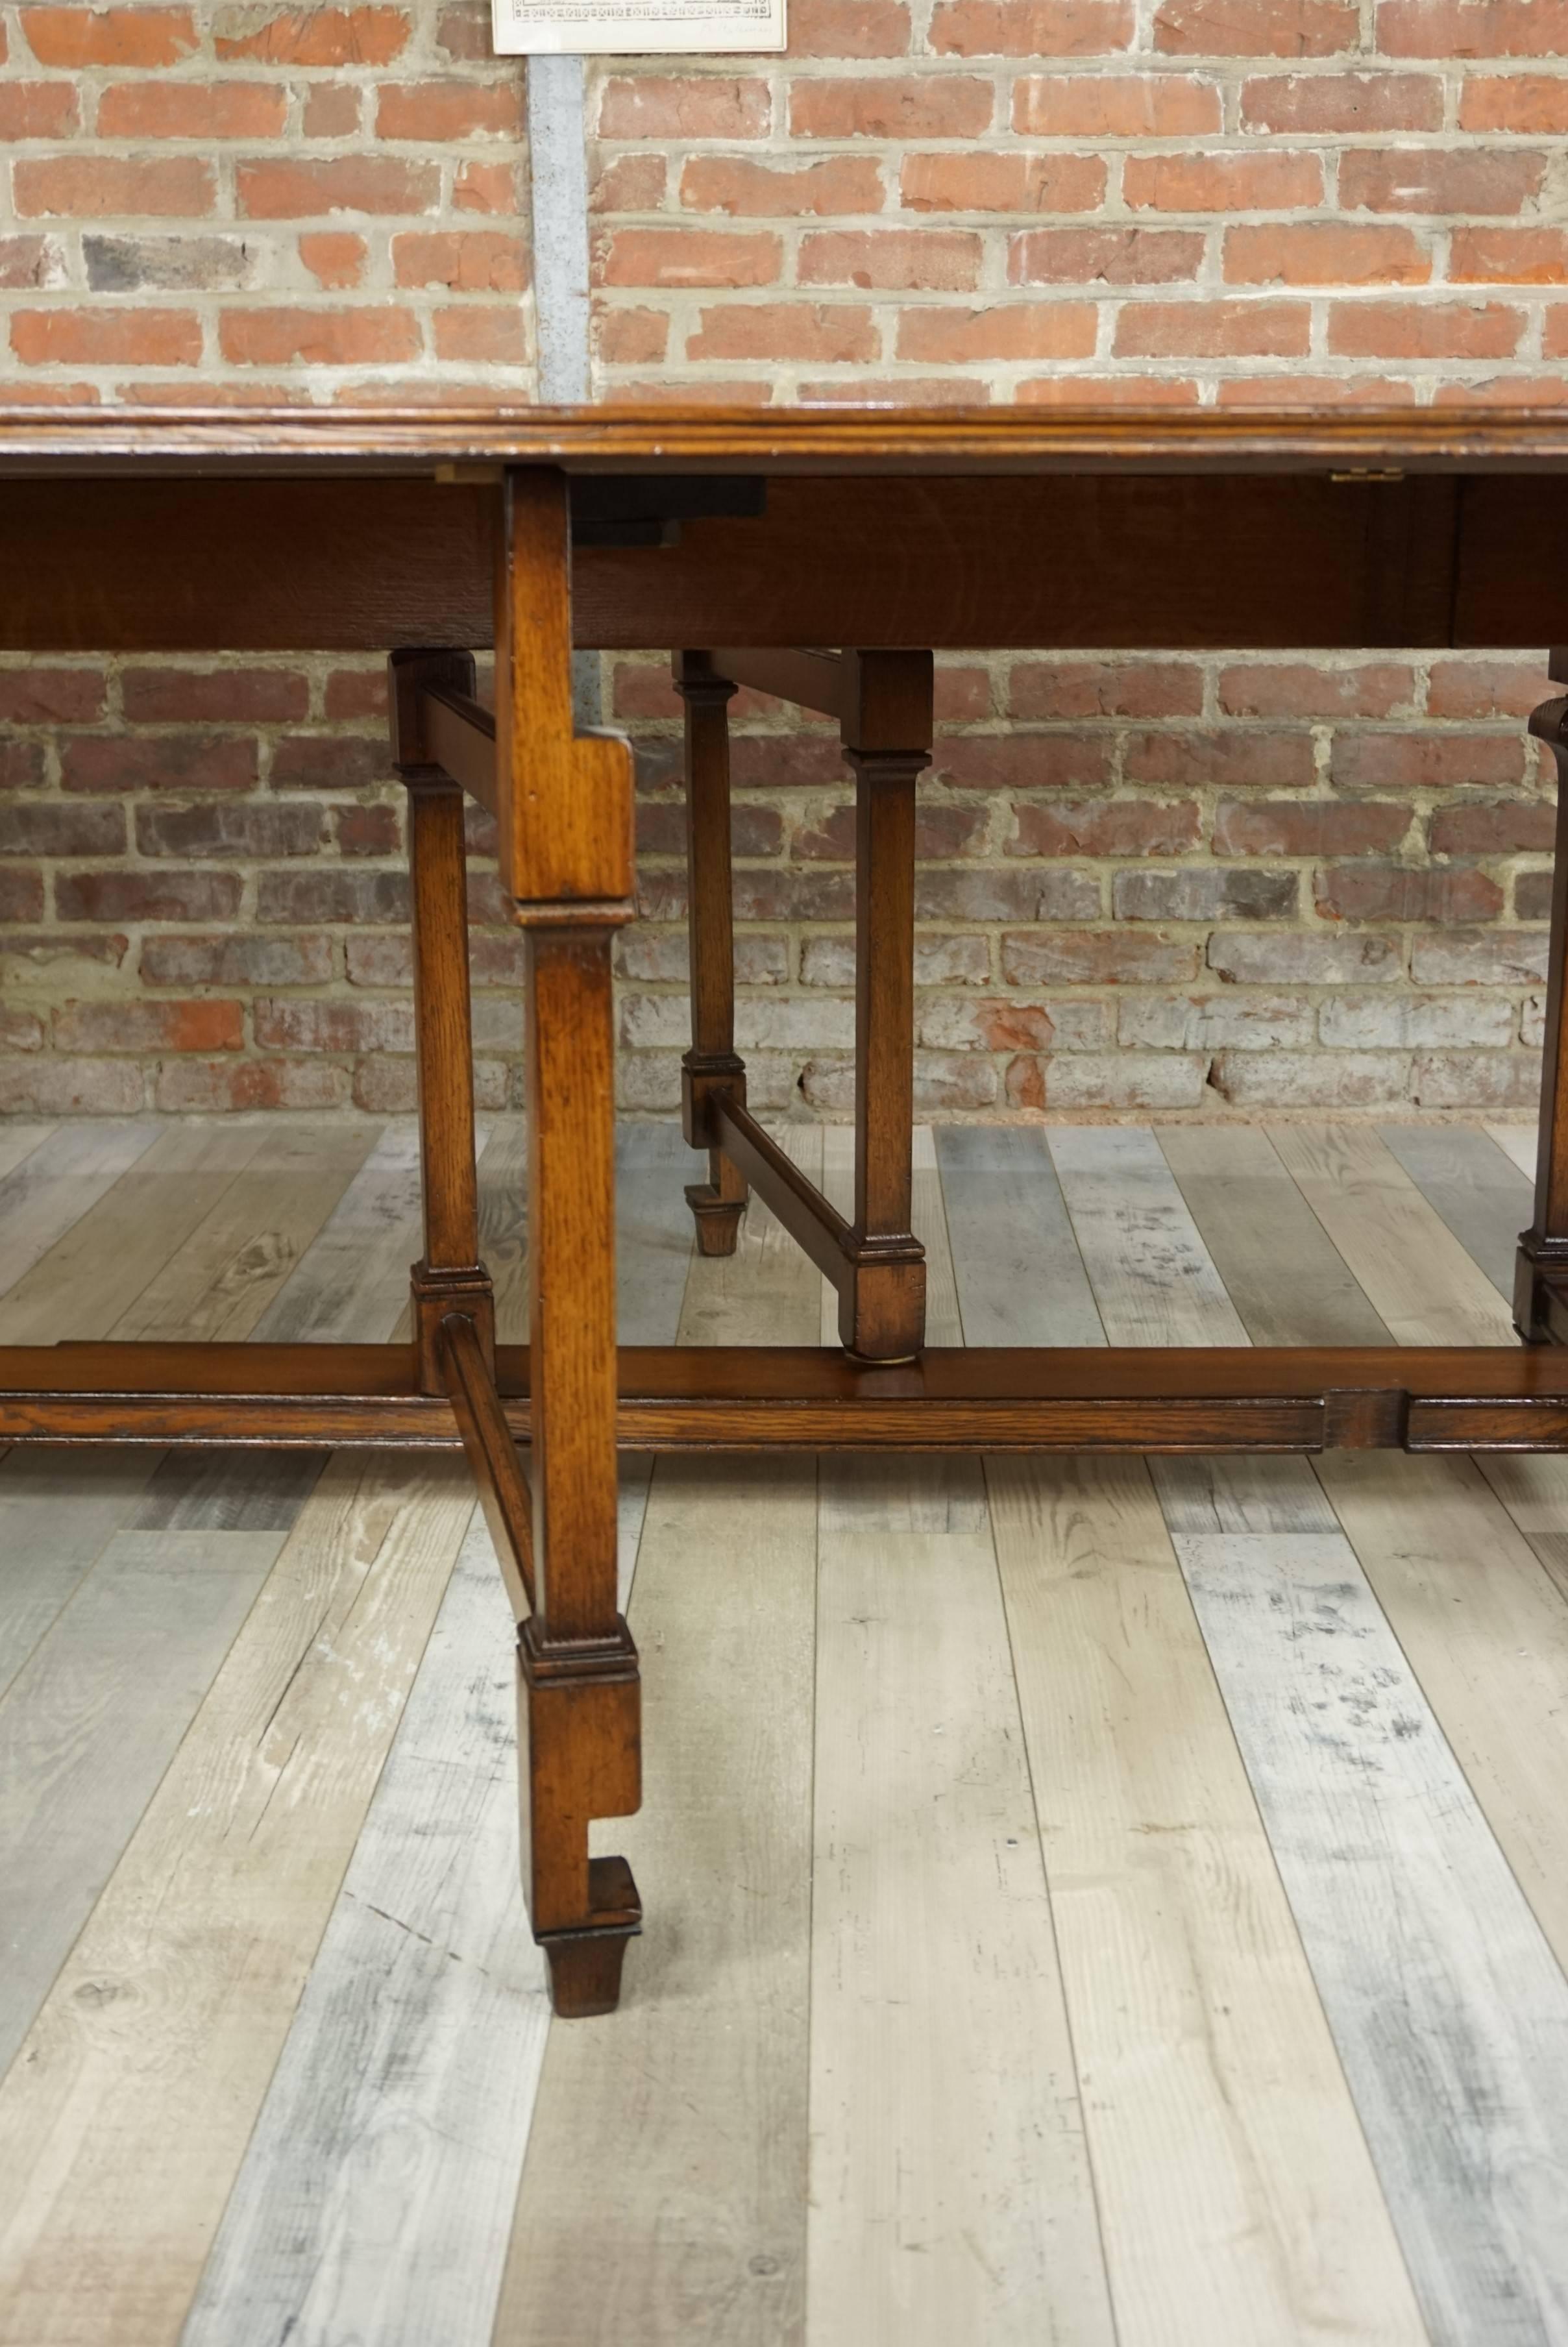 Prestance and classicism for this large dining table inlaid and oak inlay, which in a jiffy changes from rectangular (H 75cm / 200/100) to oval (H 75cm / 240/150)
Everything is in excellent condition (no blows, no gaps, no claws).